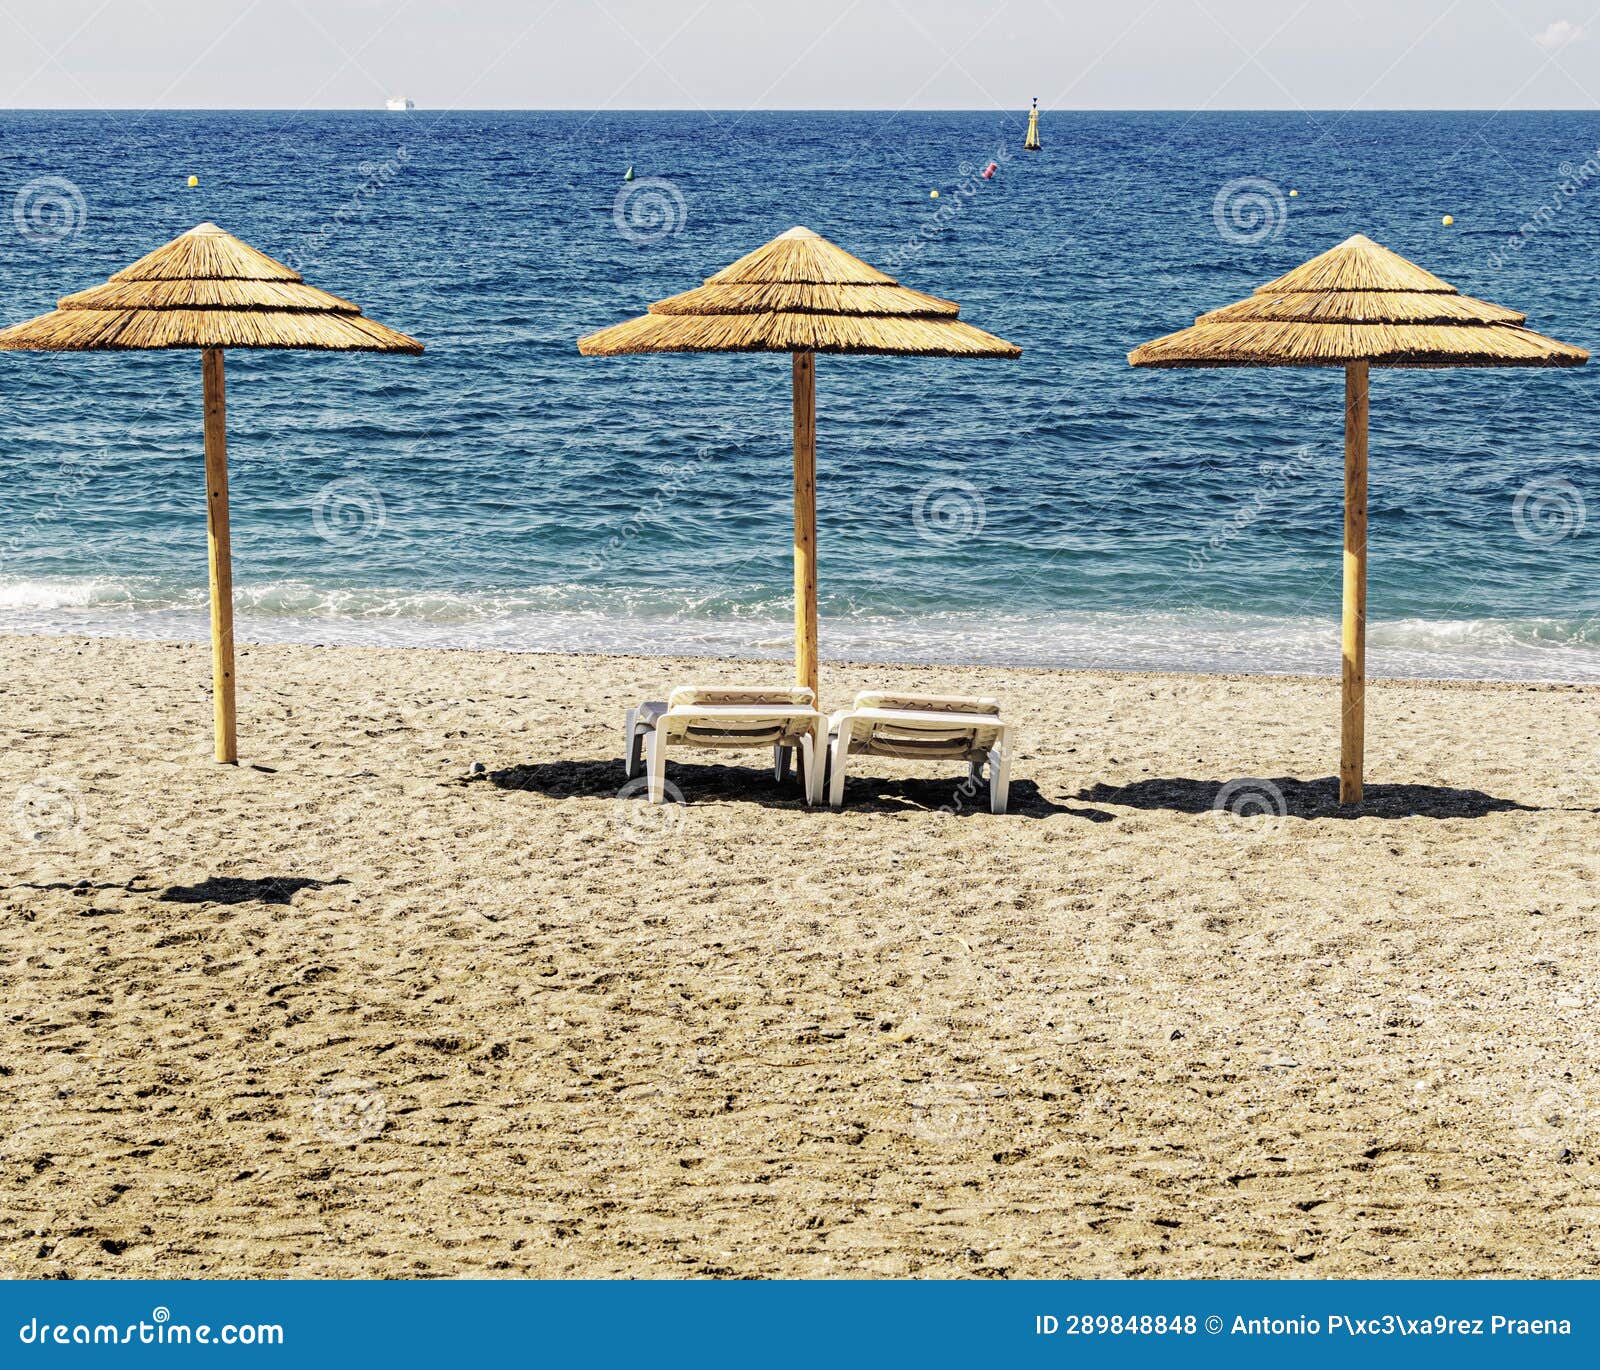 typical image of a spanish beach